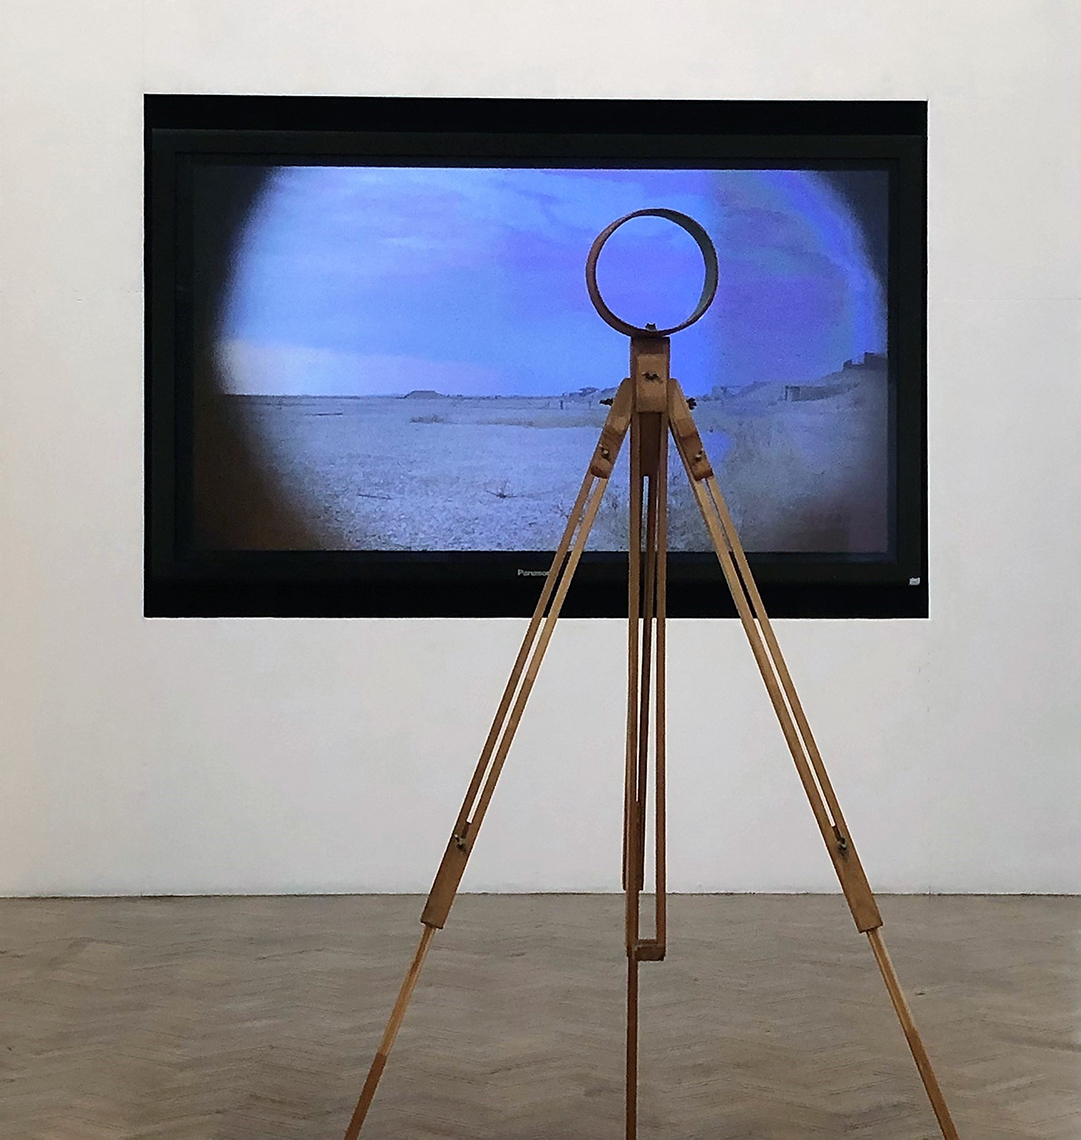 Beyondness, 2022. Installation - ceramic, wood, digital photographs, single channel Video. Size variable approx. 200 cm x 200 cm x 200 cm (installation view).